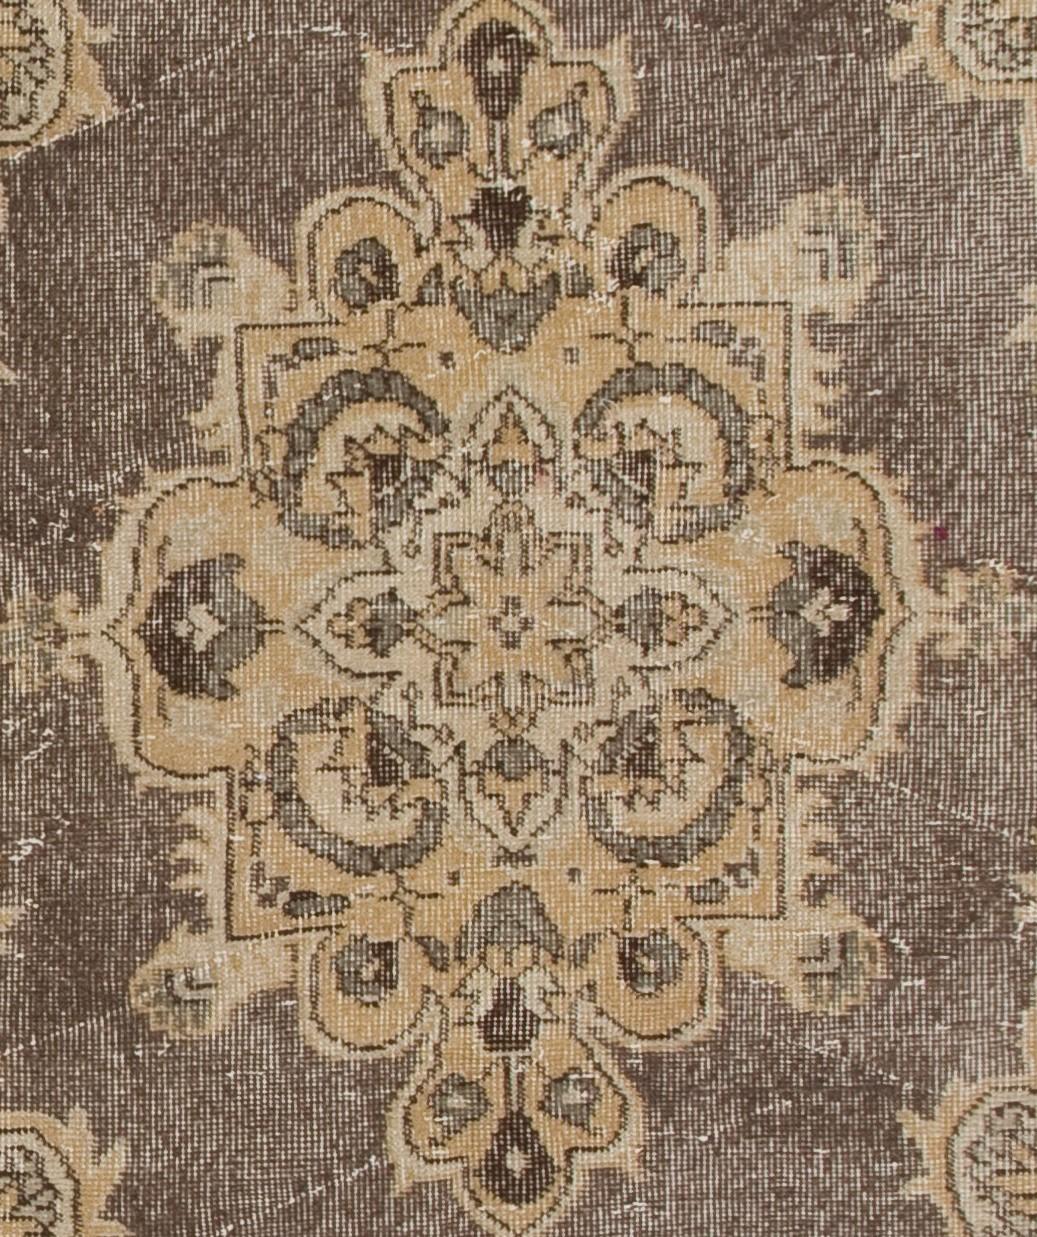 Turkish 4x6.8 Ft Vintage Hand-Knotted Distressed Wool Accent Rug in Earthy Colors For Sale